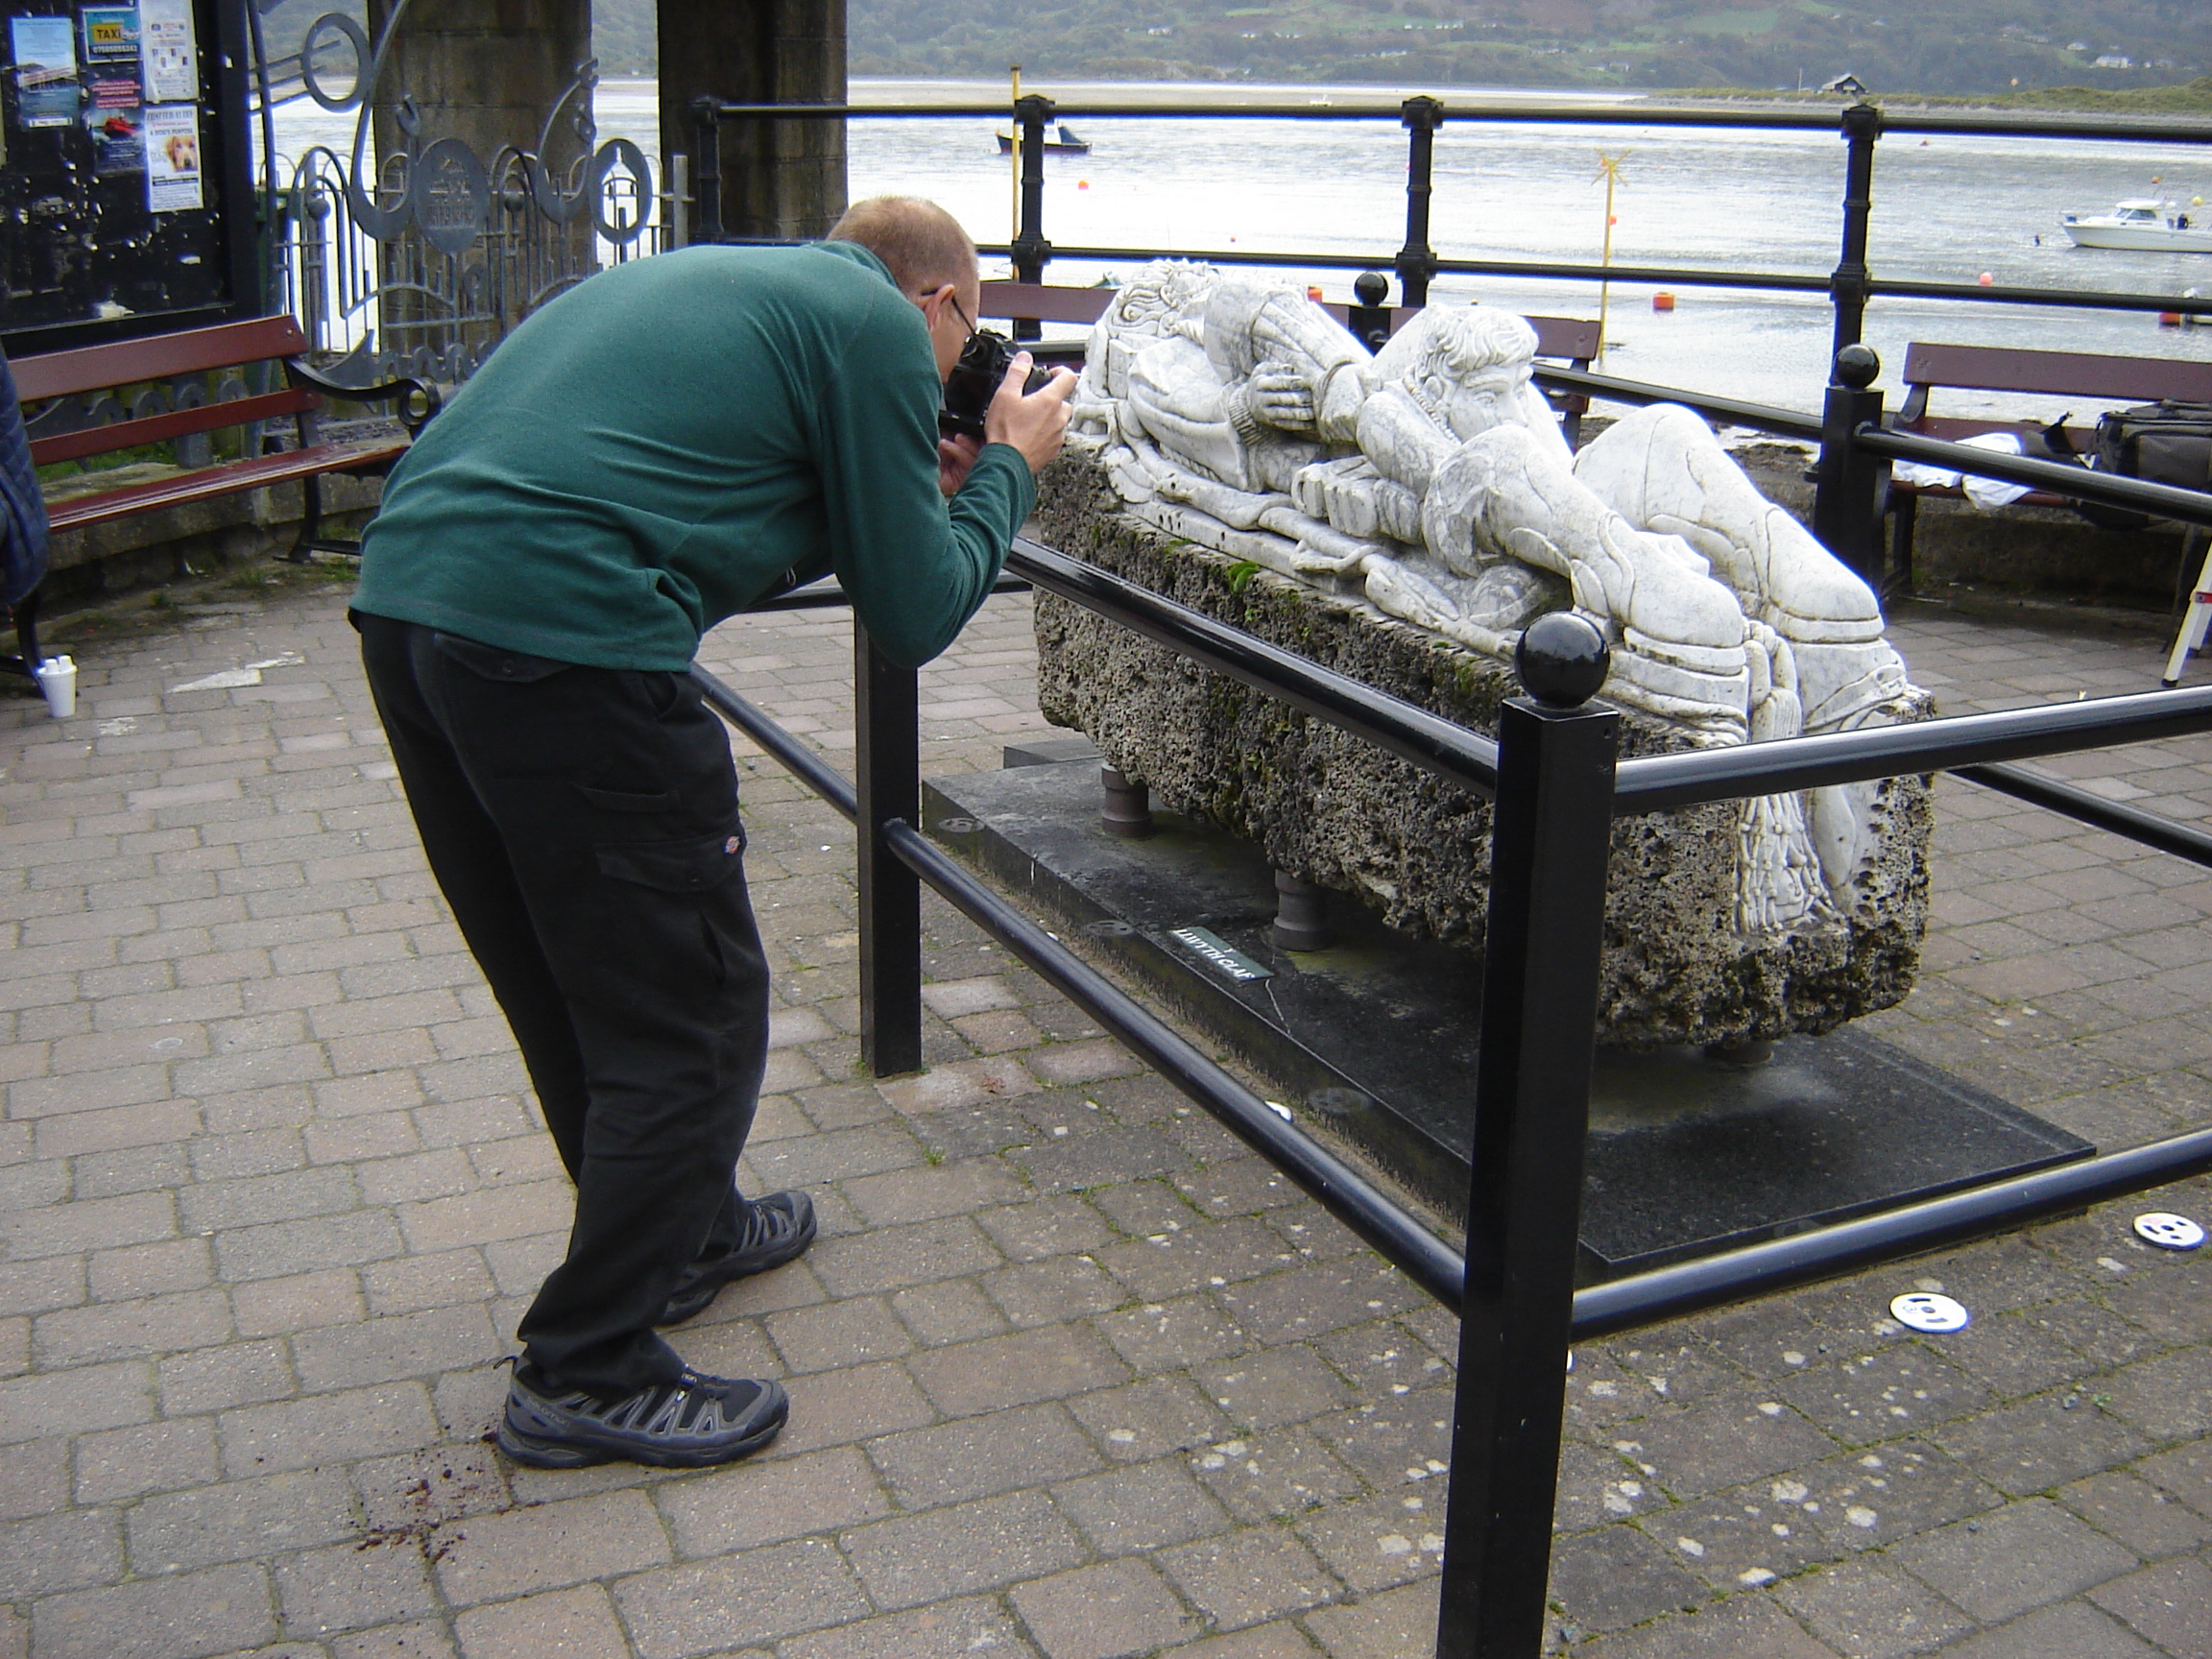 Photographing the carved marble block